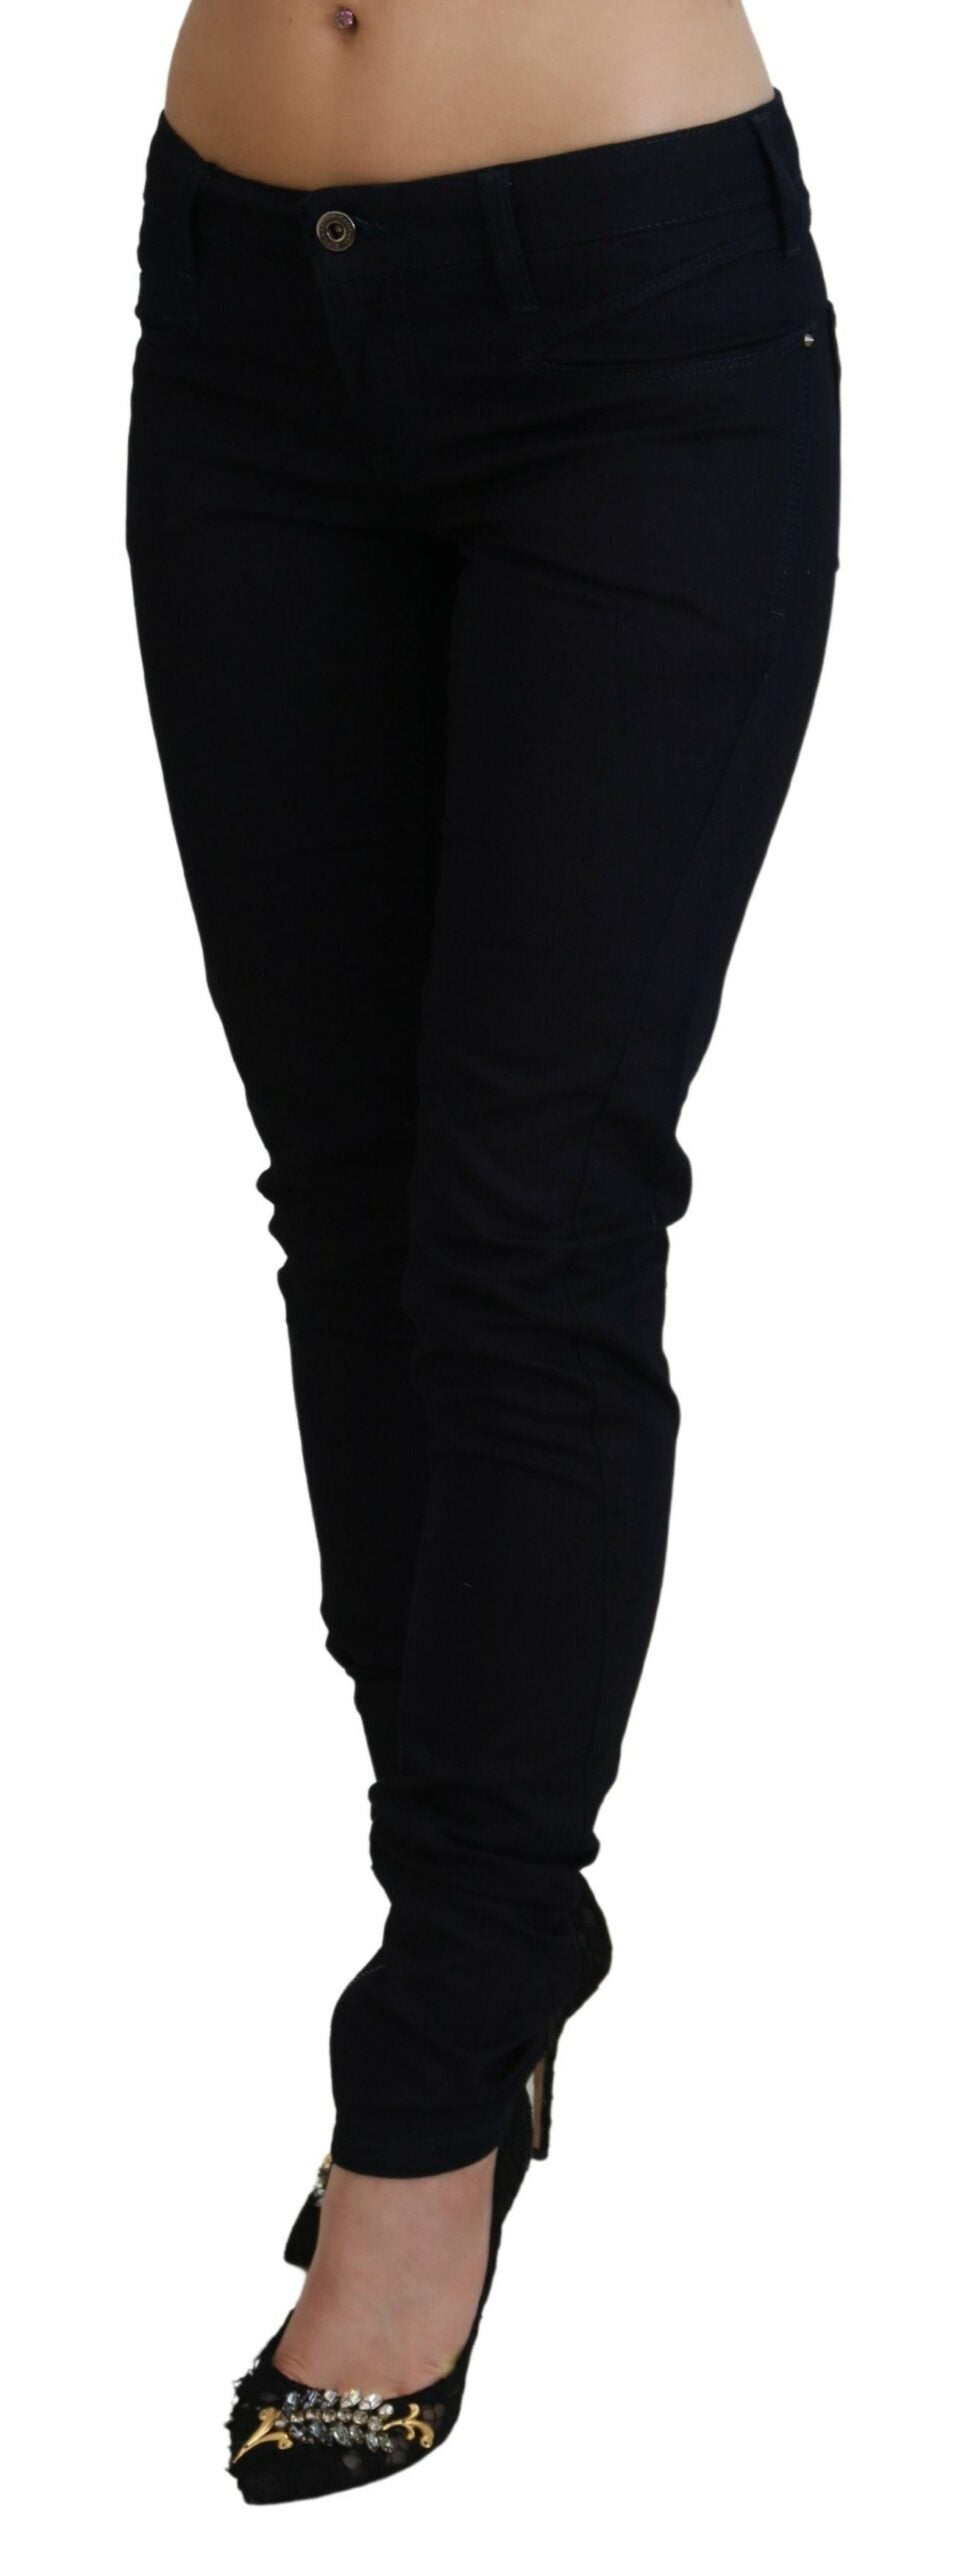 Costume National Black Low Waist Skinny Women Denim Jeans - Designed by Costume National Available to Buy at a Discounted Price on Moon Behind The Hill Online Designer Discount Store